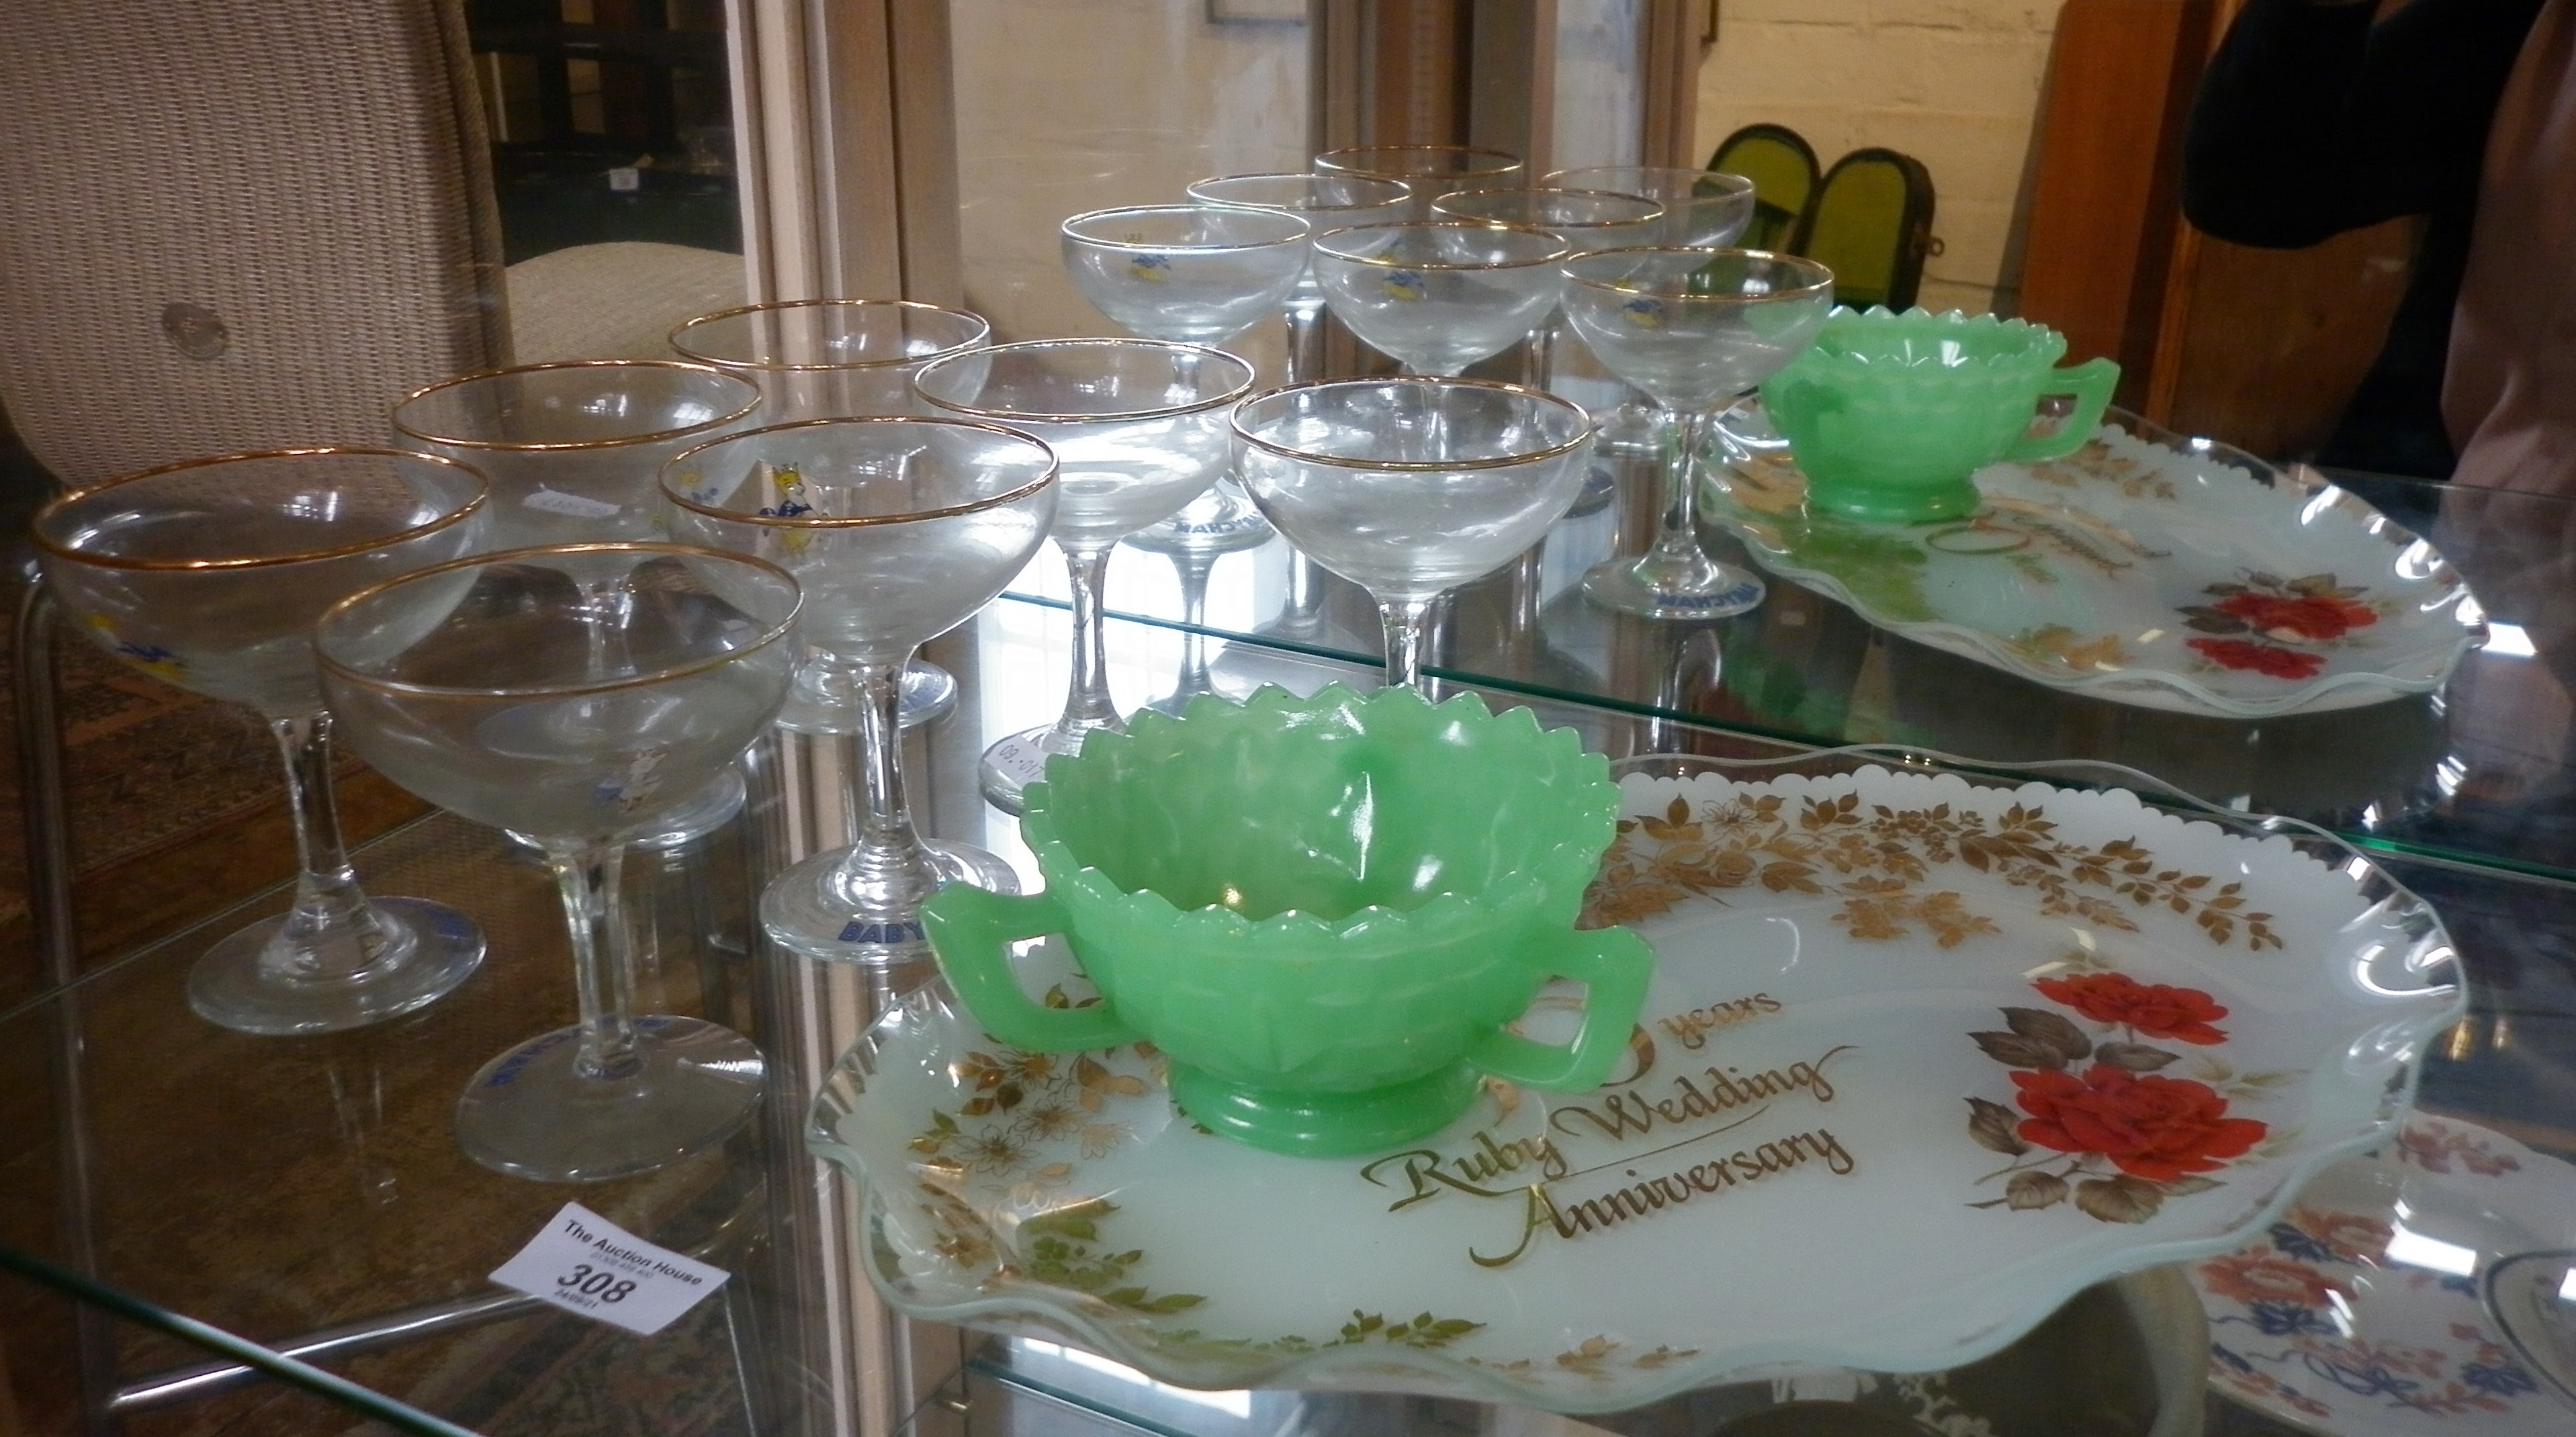 Seven Babycham glasses and two other glass items